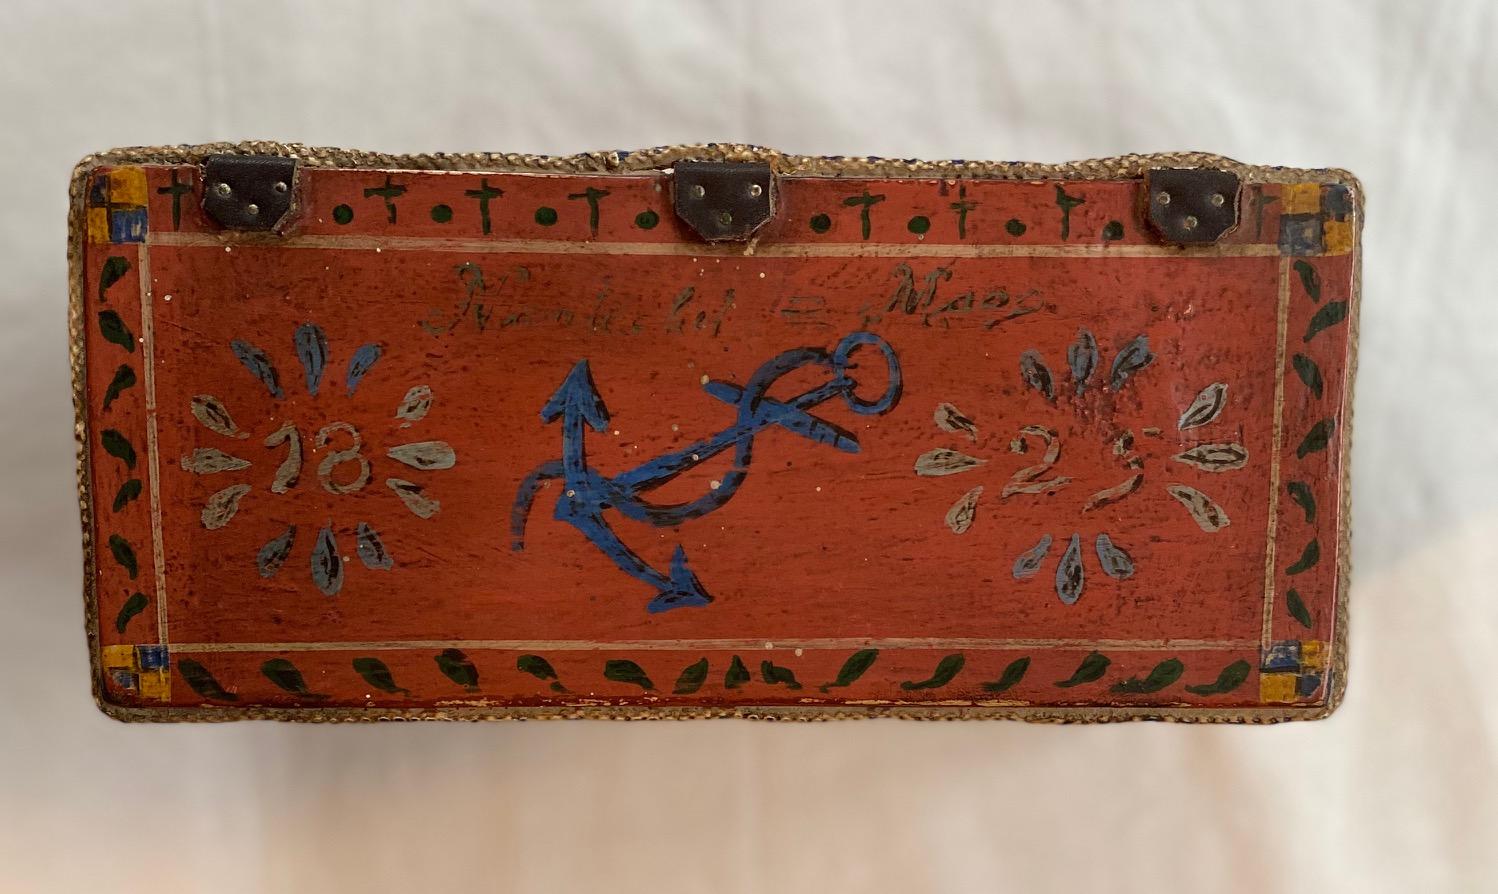 Folk Art Nantucket miniature decorated sea chest, likely circa 1940s or earlier, a classic six board chest with canted front, carved wooden beckets with rope handles, lid has edge braces and is attached via three leather hinges, there is painted